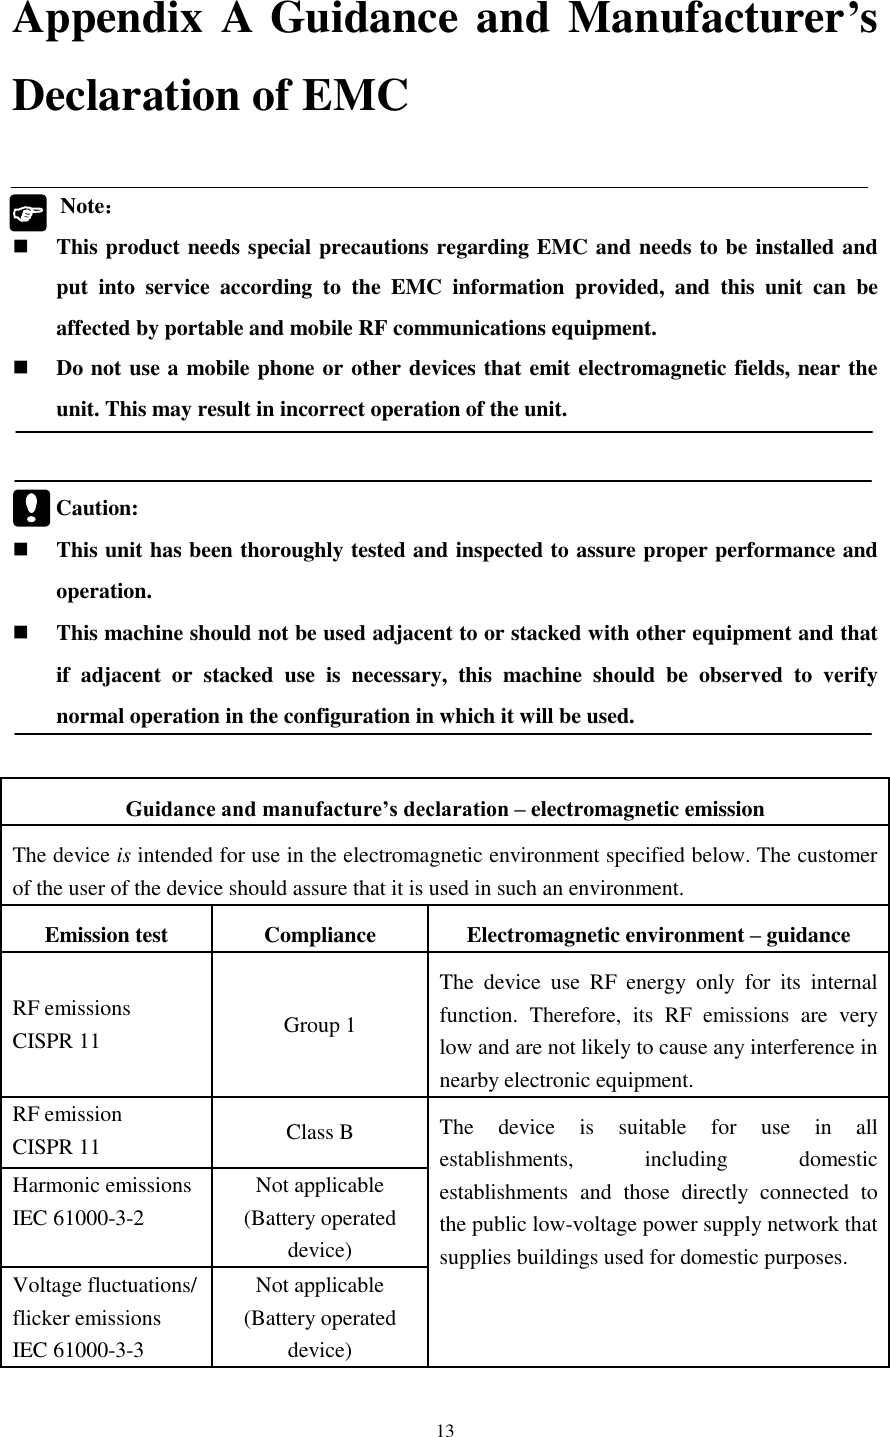 13 Appendix A Guidance and Manufacturer’s Declaration of EMC    Note：  This product needs special precautions regarding EMC and needs to be installed and put  into  service  according  to  the  EMC  information  provided,  and  this  unit  can  be affected by portable and mobile RF communications equipment.  Do not use a mobile phone or other devices that emit electromagnetic fields, near the unit. This may result in incorrect operation of the unit.     Caution:    This unit has been thoroughly tested and inspected to assure proper performance and operation.  This machine should not be used adjacent to or stacked with other equipment and that if  adjacent  or  stacked  use  is  necessary,  this  machine  should  be  observed  to  verify normal operation in the configuration in which it will be used.  Guidance and manufacture’s declaration – electromagnetic emission The device is intended for use in the electromagnetic environment specified below. The customer of the user of the device should assure that it is used in such an environment. Emission test Compliance Electromagnetic environment – guidance RF emissions CISPR 11 Group 1 The  device use  RF  energy  only  for  its  internal function.  Therefore,  its  RF  emissions  are  very low and are not likely to cause any interference in nearby electronic equipment. RF emission CISPR 11 Class B The  device  is  suitable  for  use  in  all establishments,  including  domestic establishments  and  those  directly  connected  to the public low-voltage power supply network that supplies buildings used for domestic purposes. Harmonic emissions IEC 61000-3-2 Not applicable (Battery operated device) Voltage fluctuations/ flicker emissions IEC 61000-3-3 Not applicable (Battery operated device)   